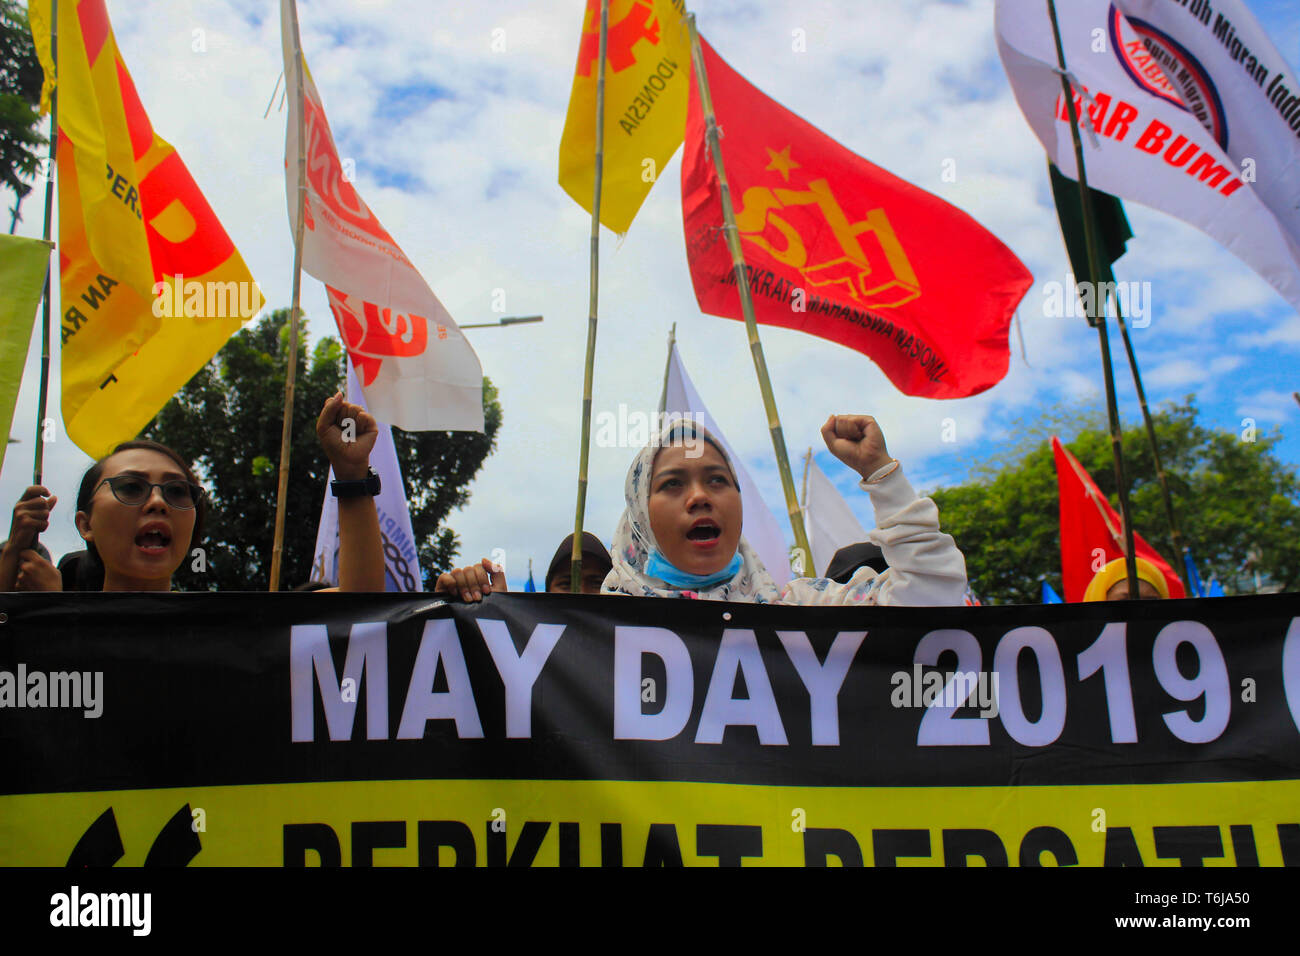 Workers are seen shouting slogans while holding flags and a banner during the rally. Thousands of workers are urging the government to raise minimum wages and to improve working conditions. Stock Photo